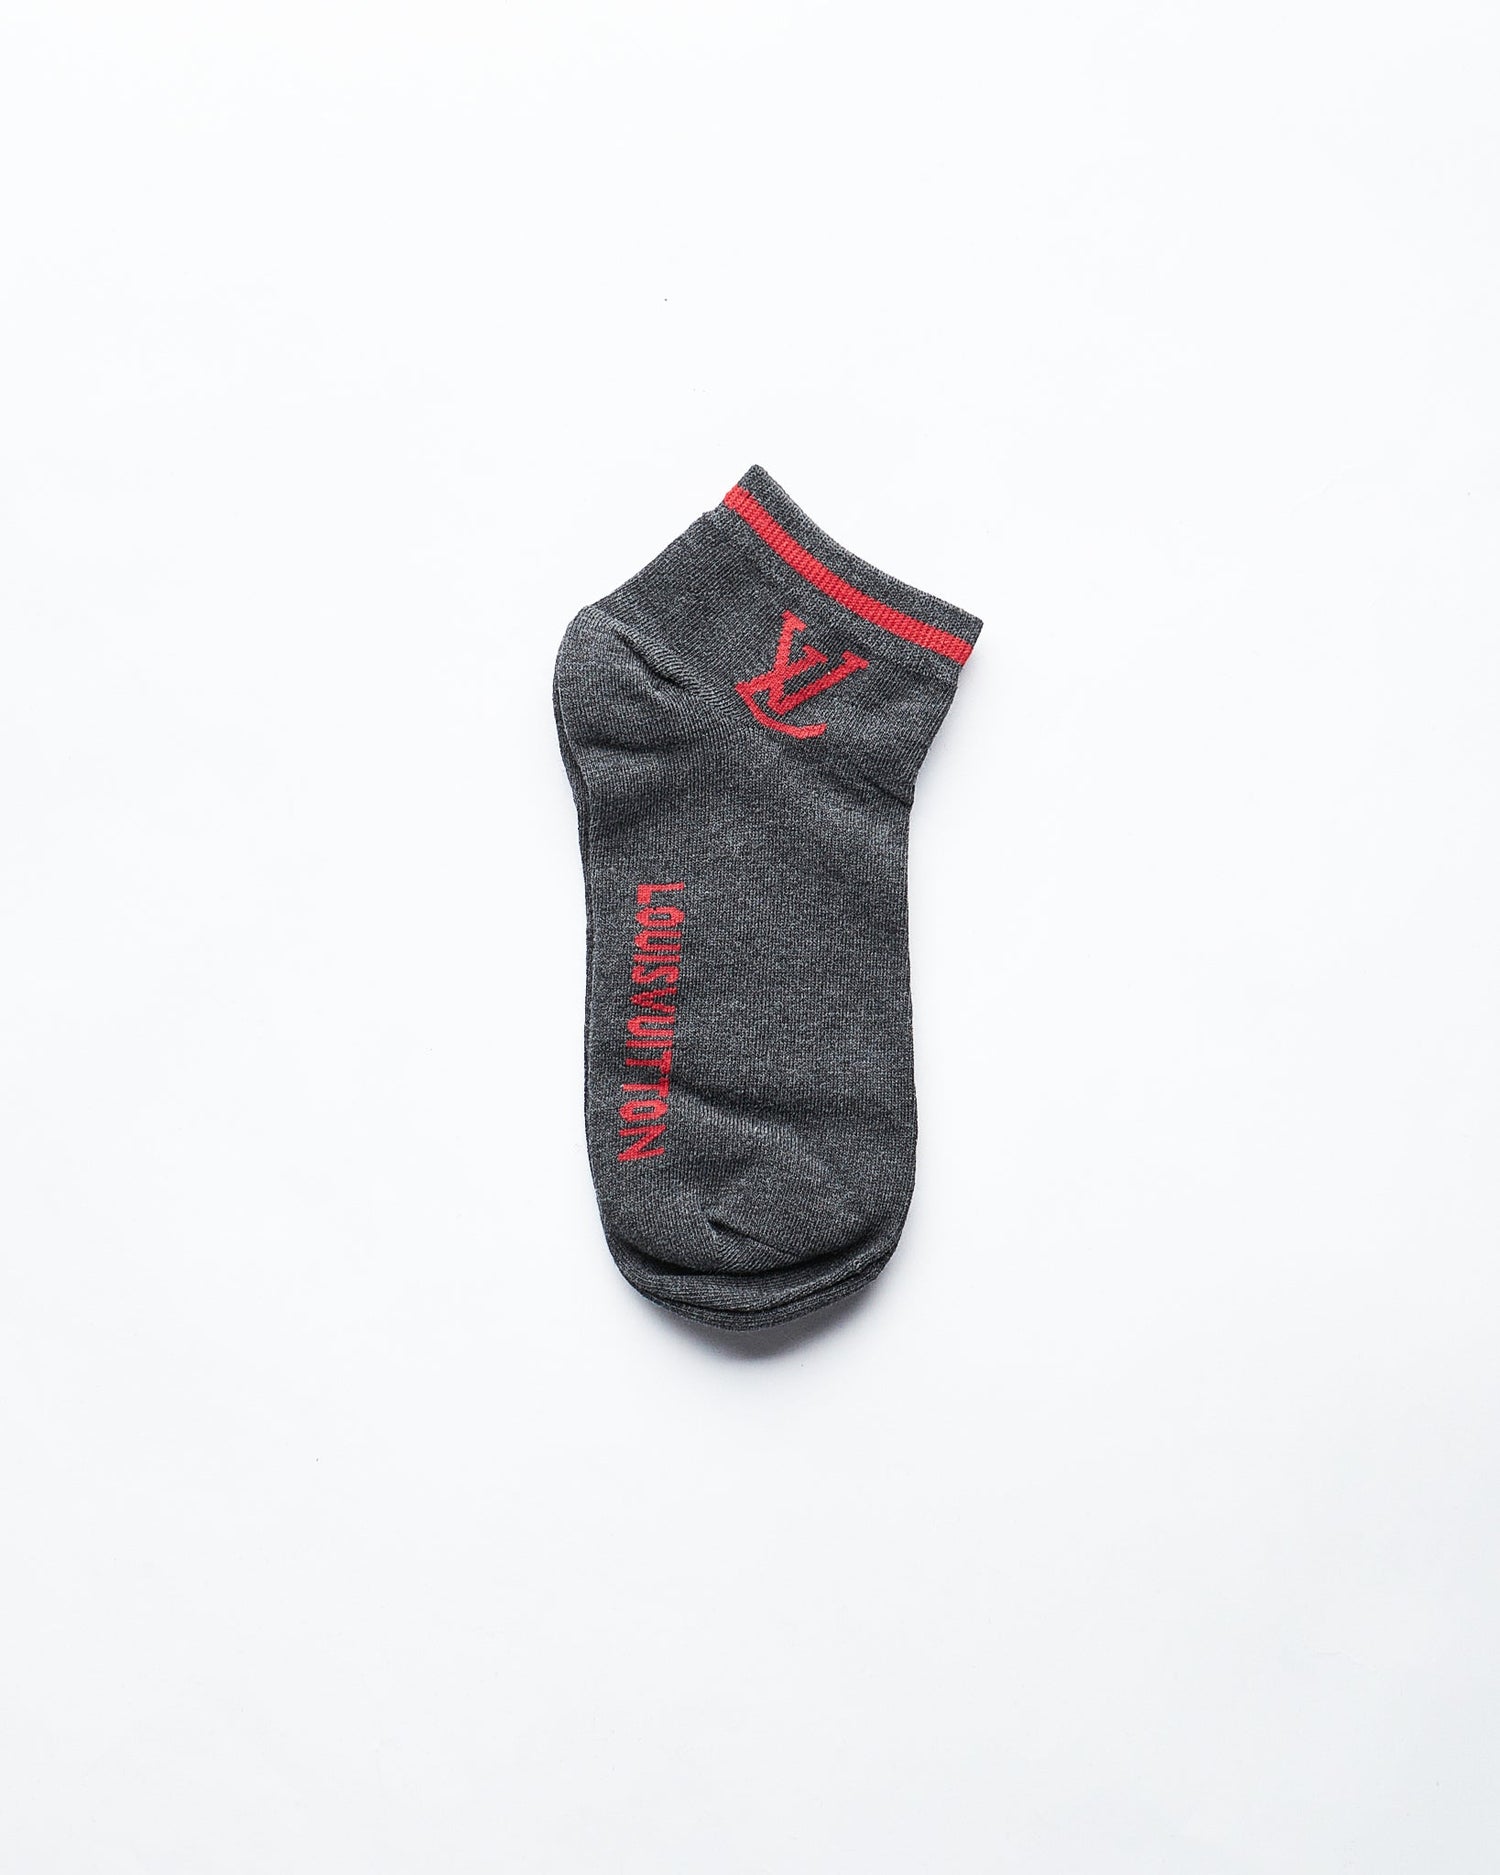 LV 5 Pairs Low Cut Socks 13.90 - MOI OUTFIT